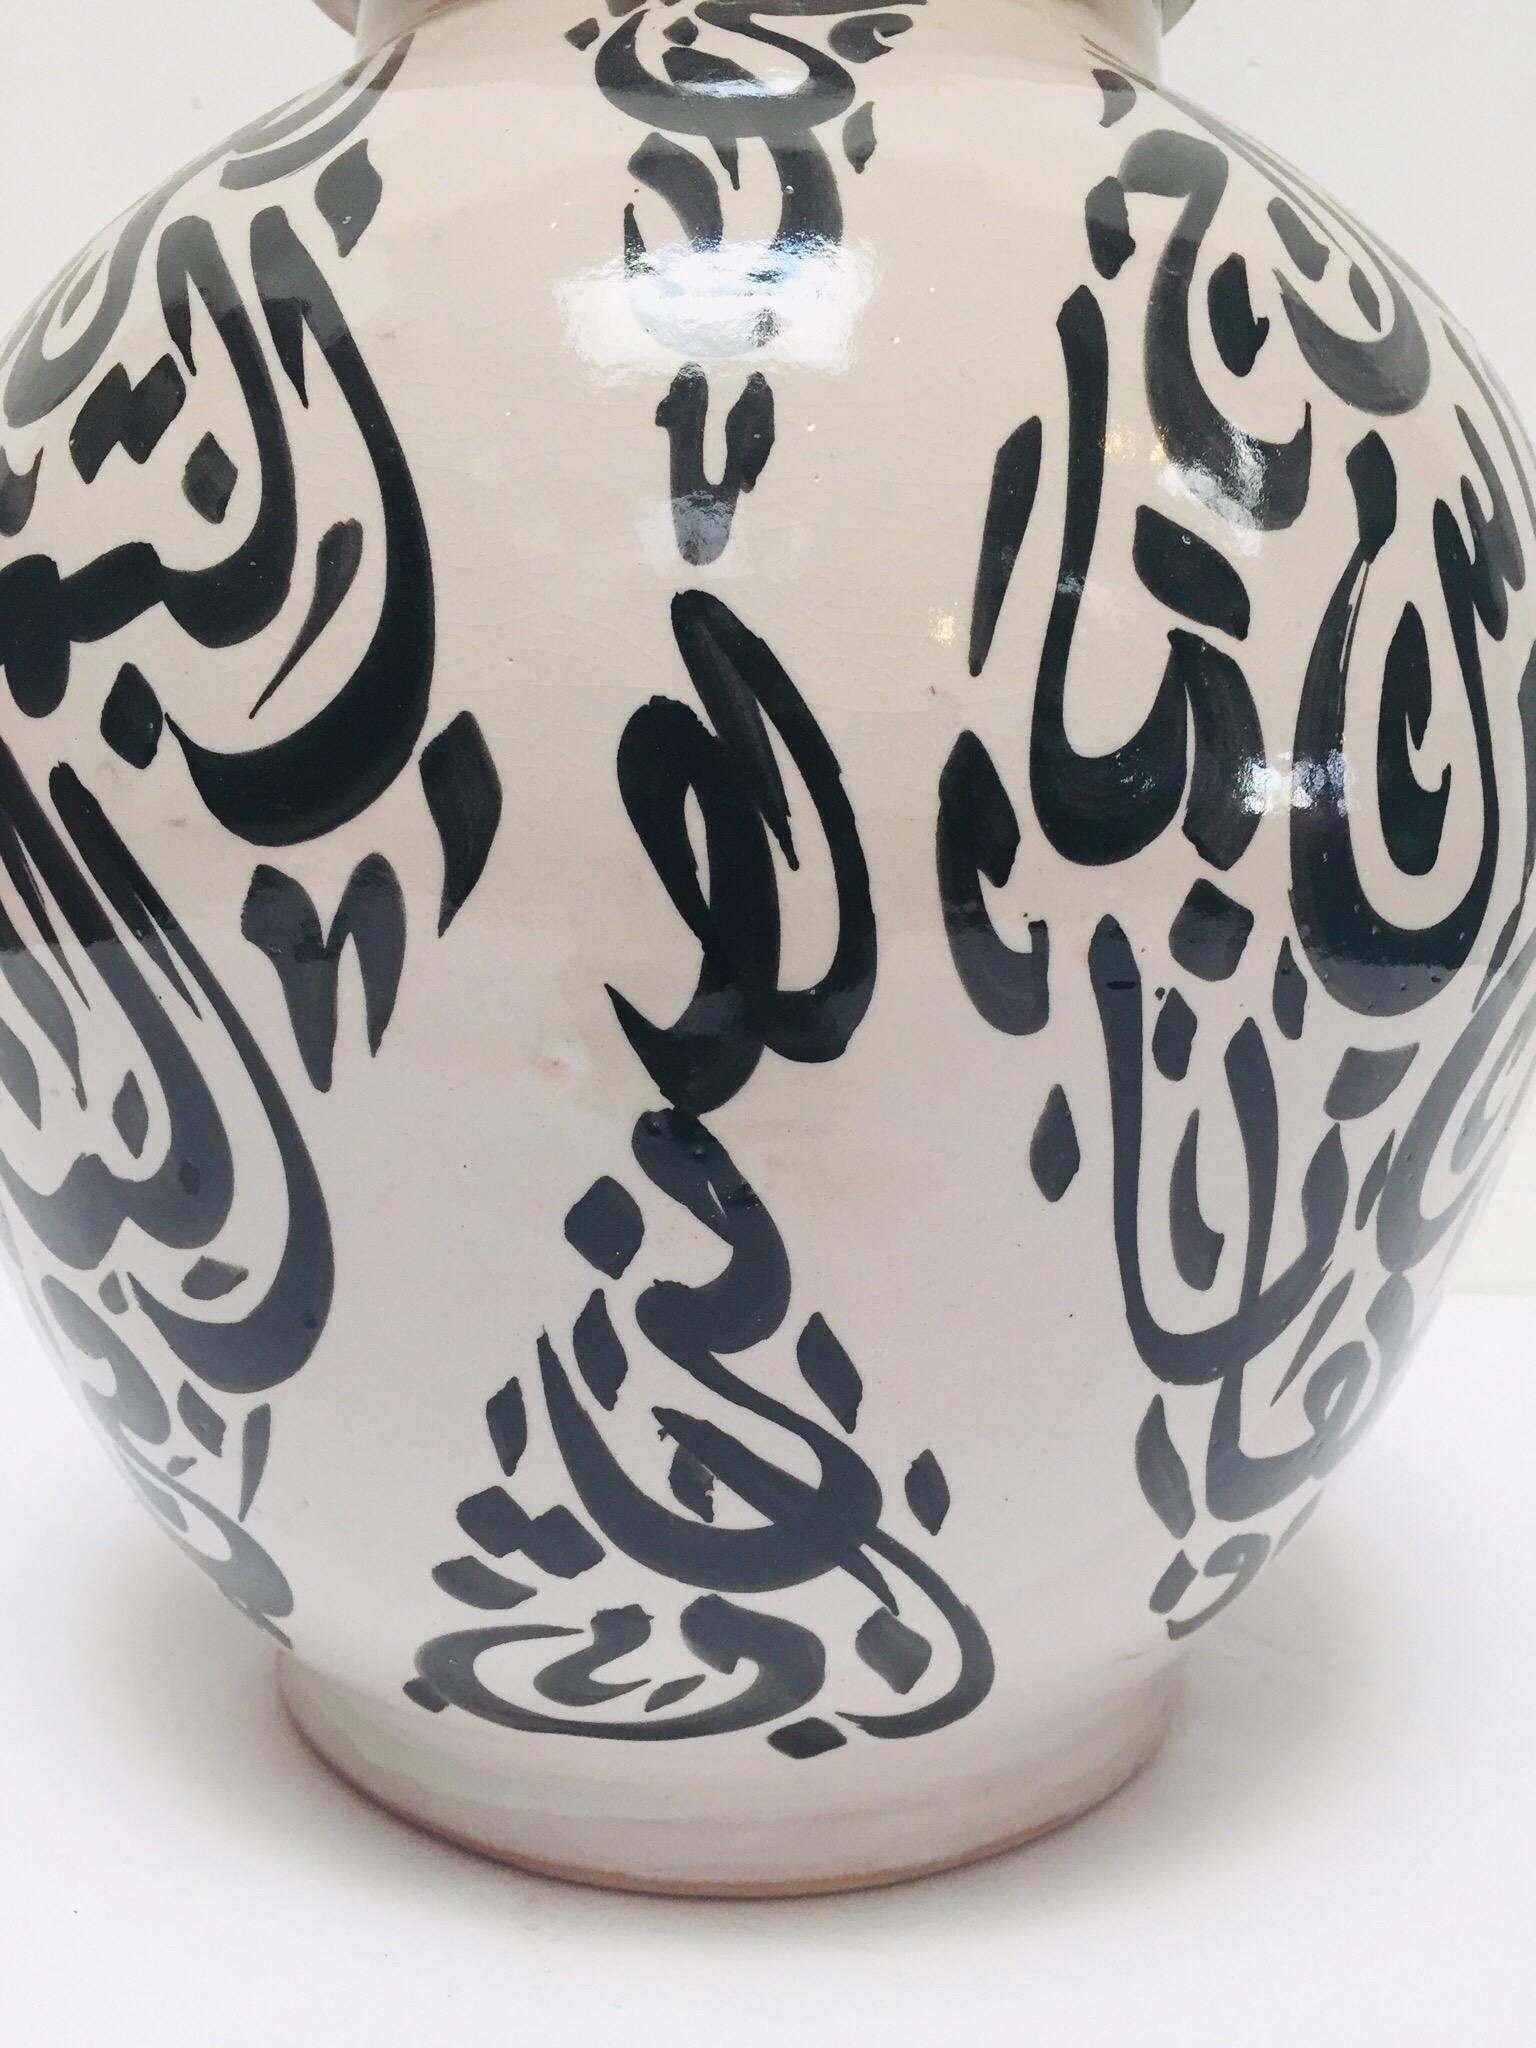 Moroccan Moorish Ceramic Lidded Urn with Arabic Calligraphy Lettrism Black Writing For Sale